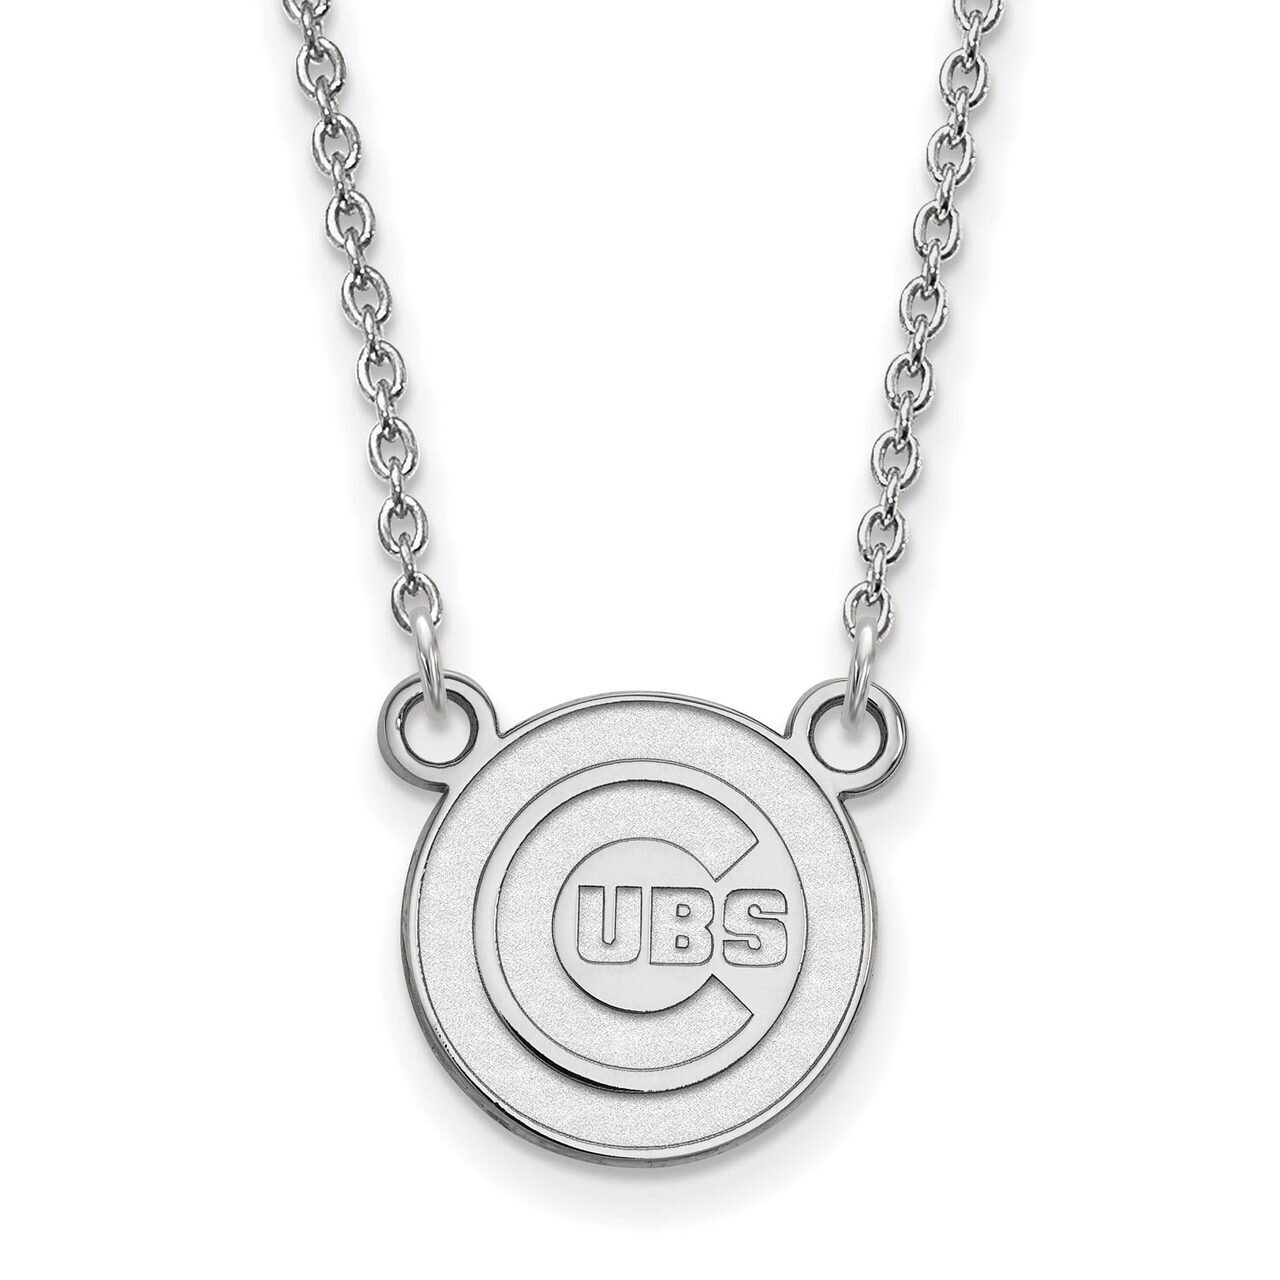 Chicago Cubs Small Pendant with Chain Necklace 10k White Gold 1W009CUB-18